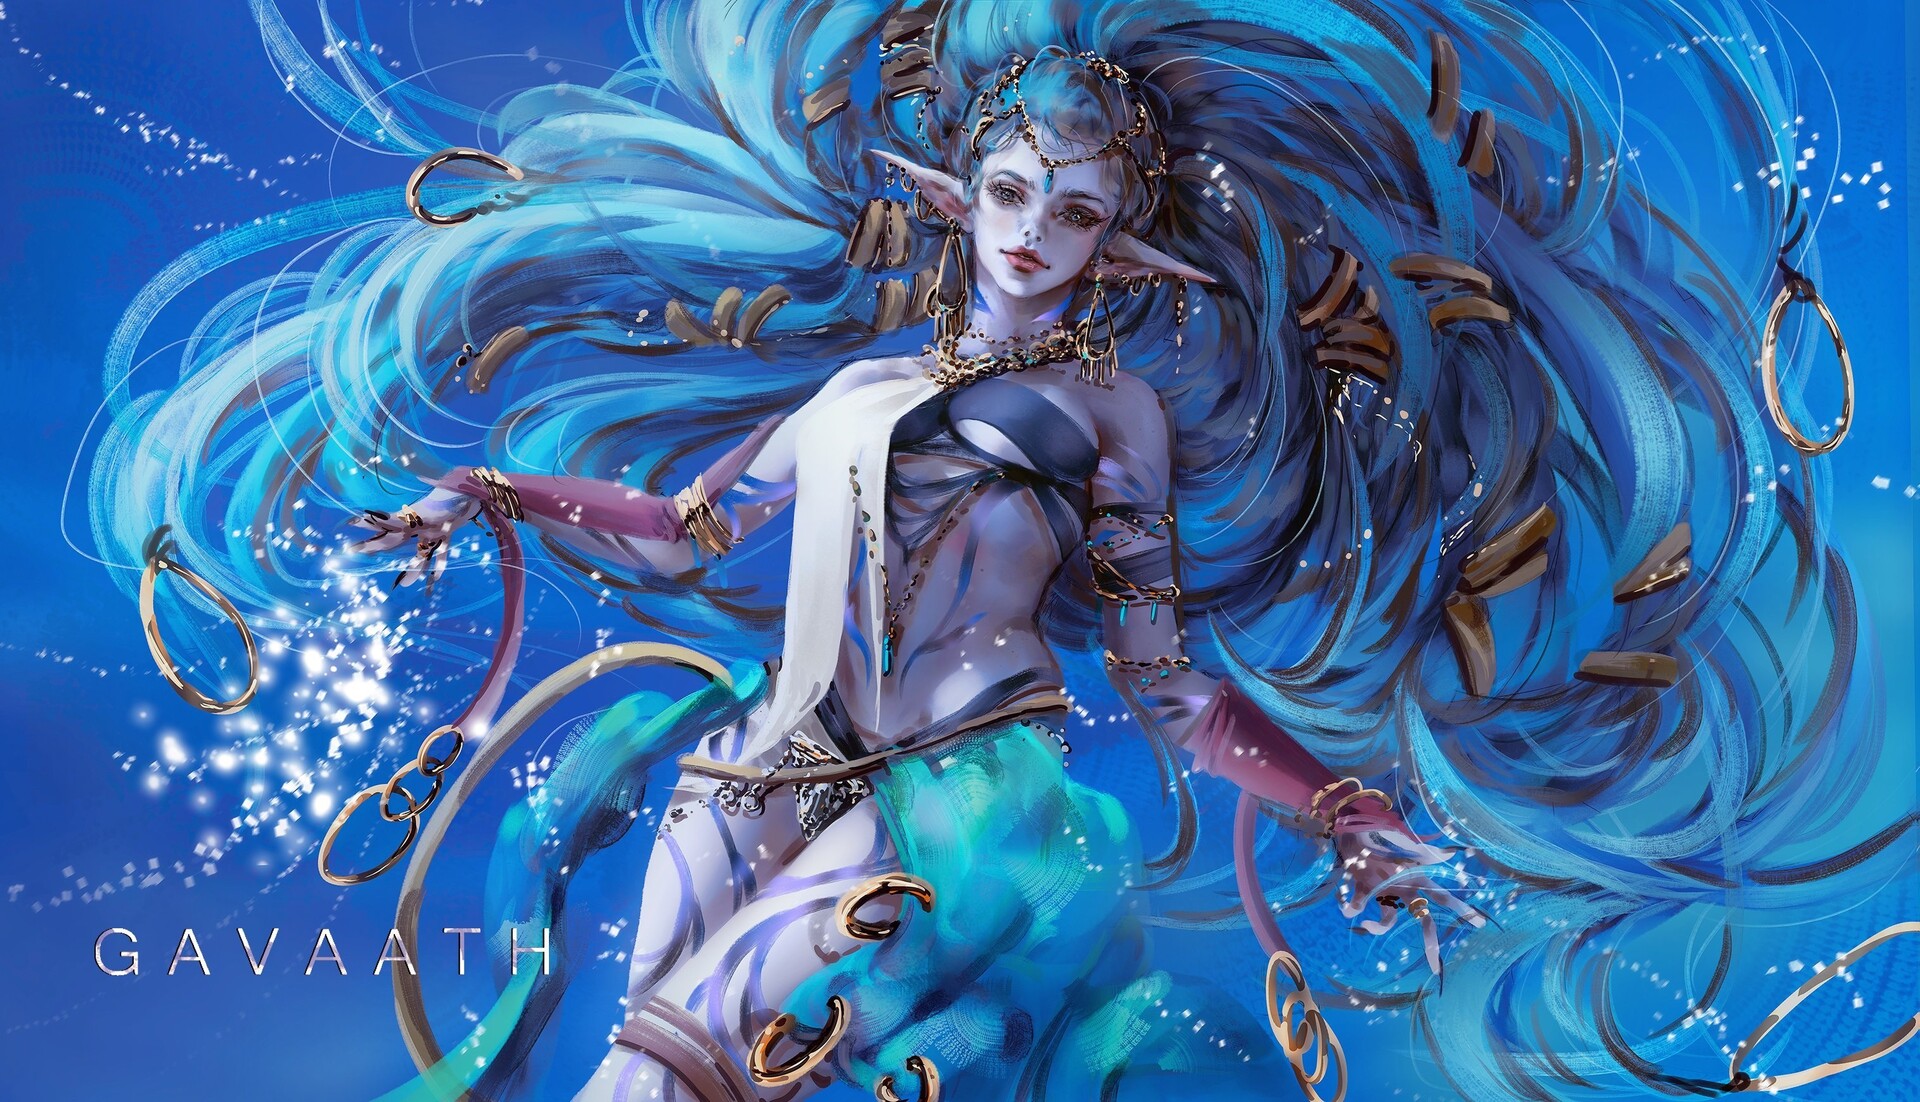 Shiva from Final Fantasy, inspired on the Shiva duty from FFXIV and the FFX...